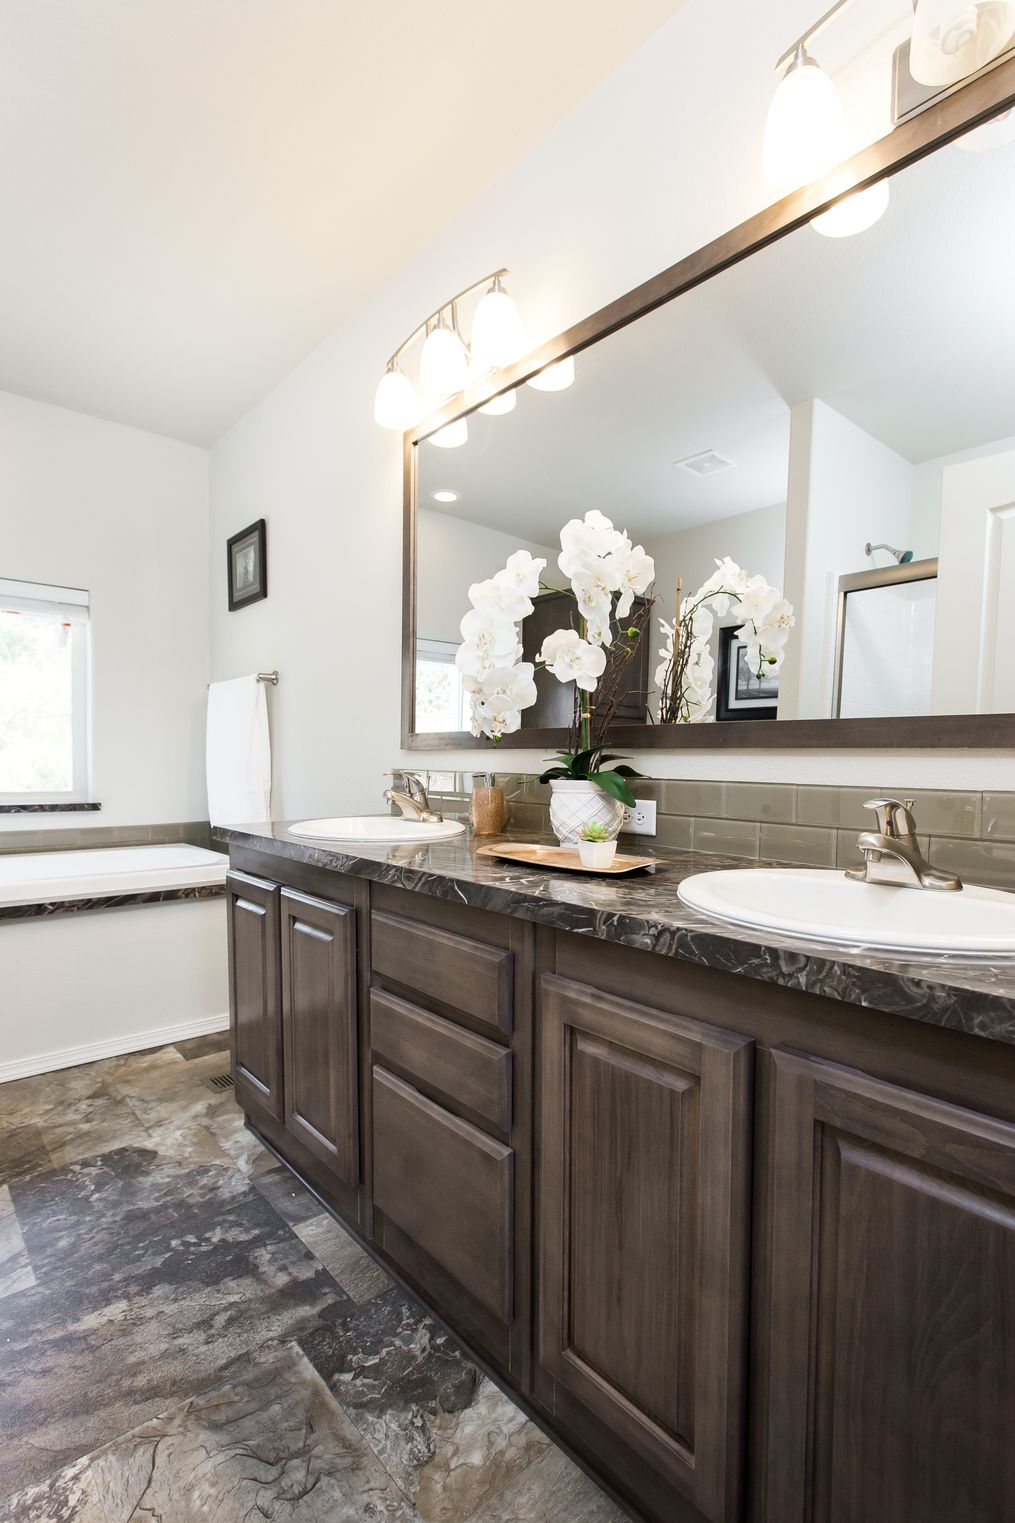 The 2868 MARLETTE SPECIAL Master Bathroom. This Manufactured Mobile Home features 3 bedrooms and 2.5 baths.